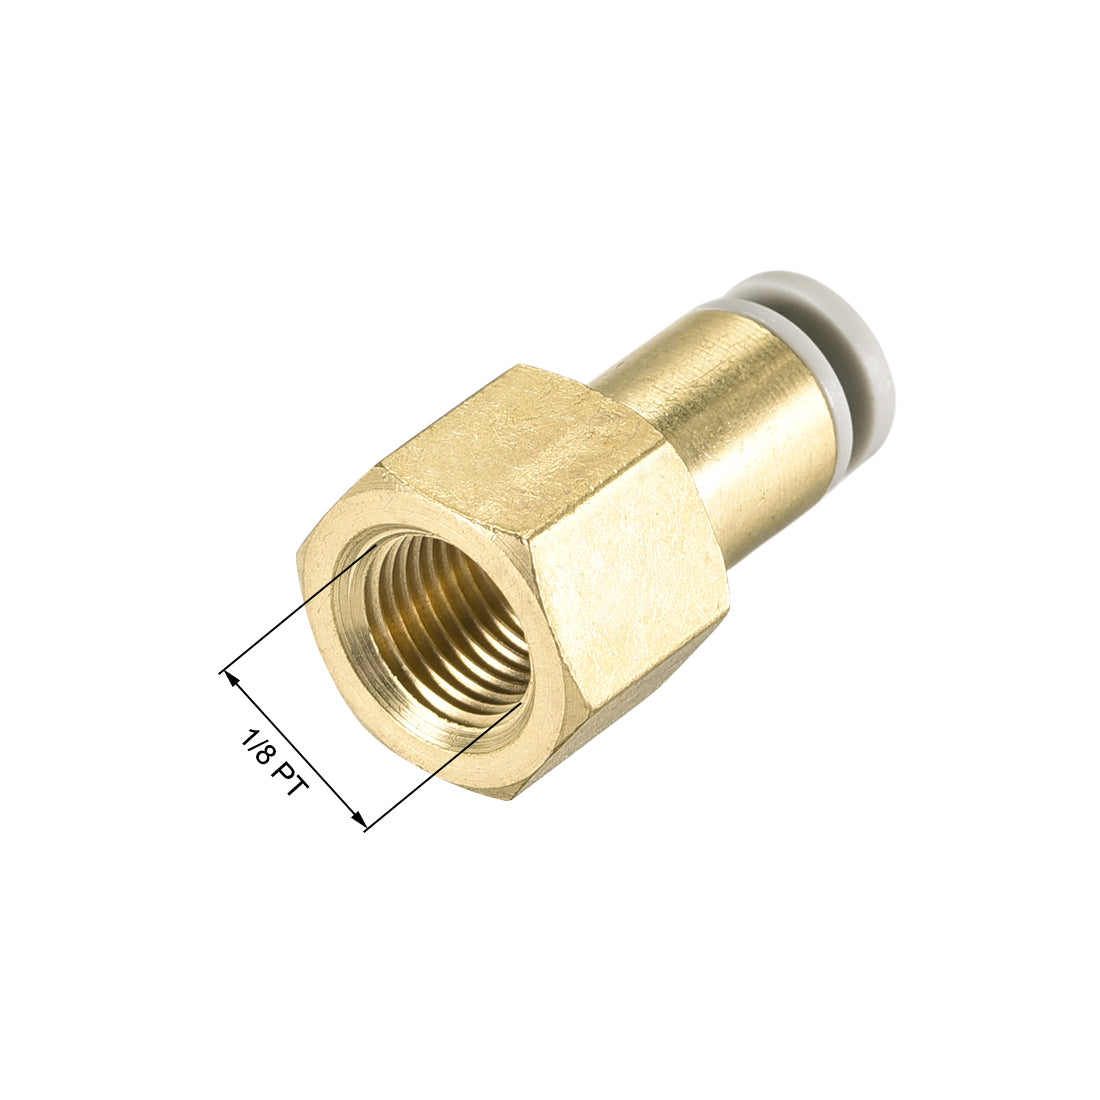 uxcell Uxcell Push to Connect Tube Fittings 4mm Tube OD x 1/8 PT Female Golden Tone 5Pcs